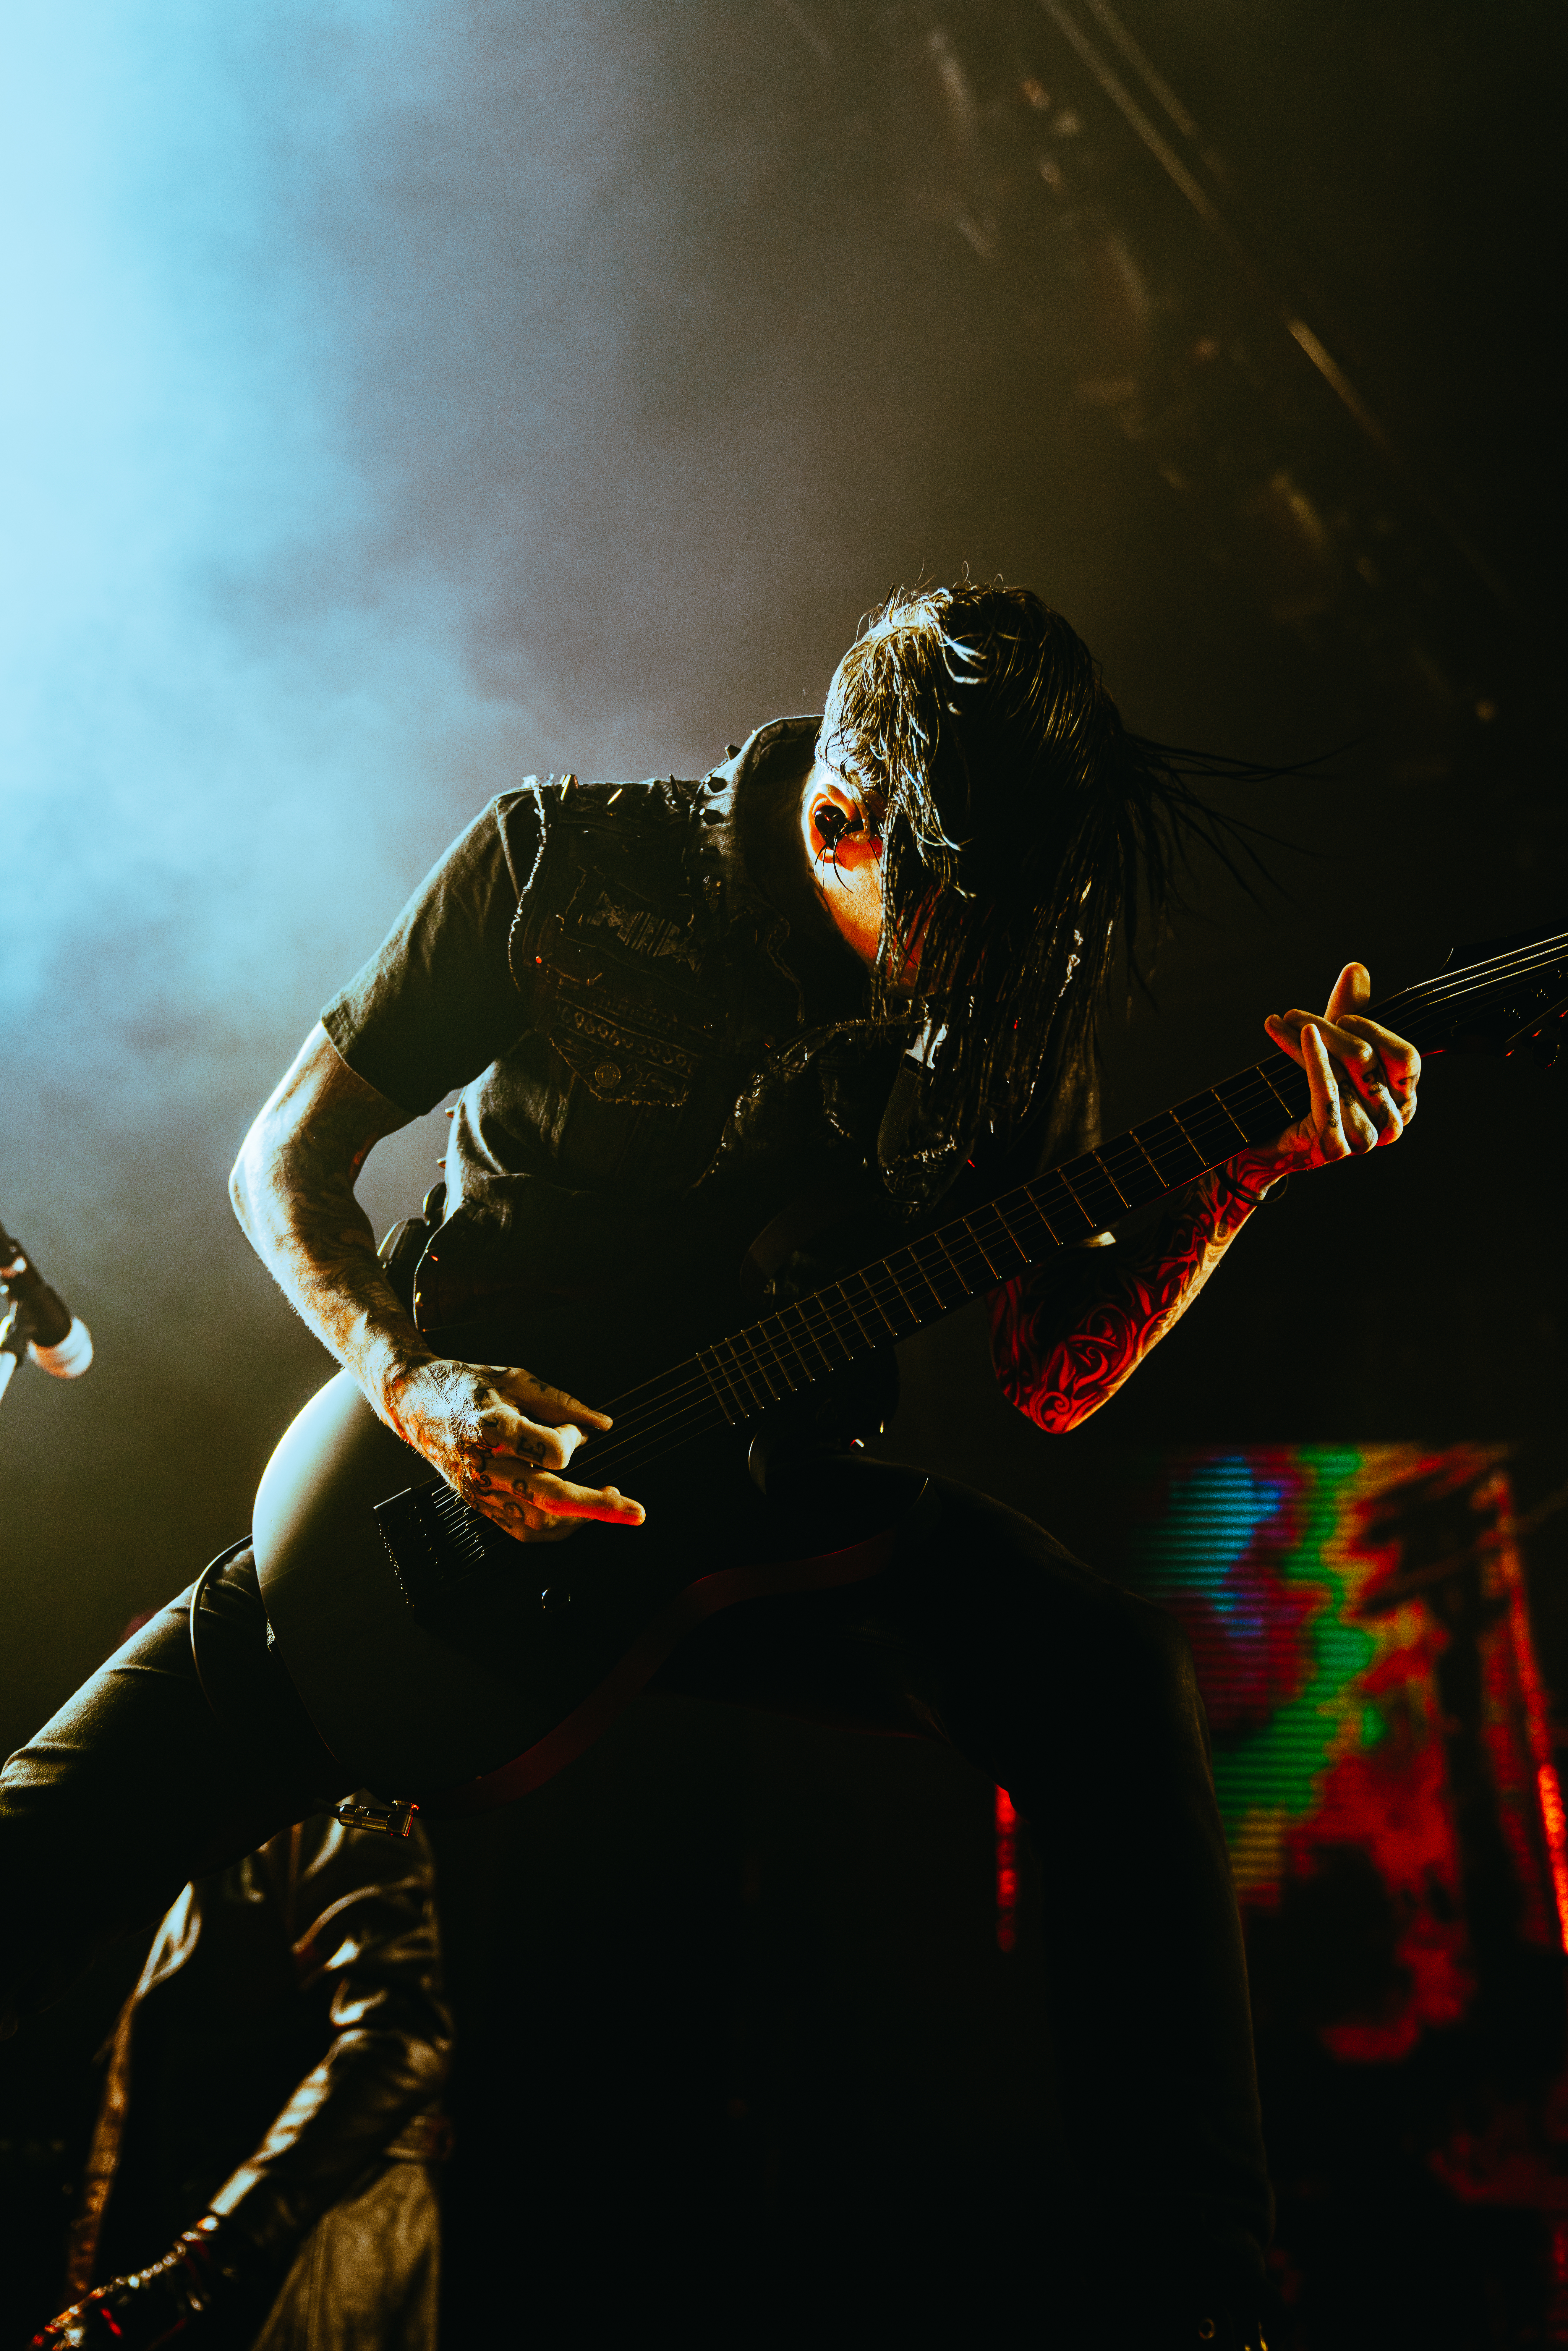 Motionless in White photo by Zak DeFreze for HM Magazine